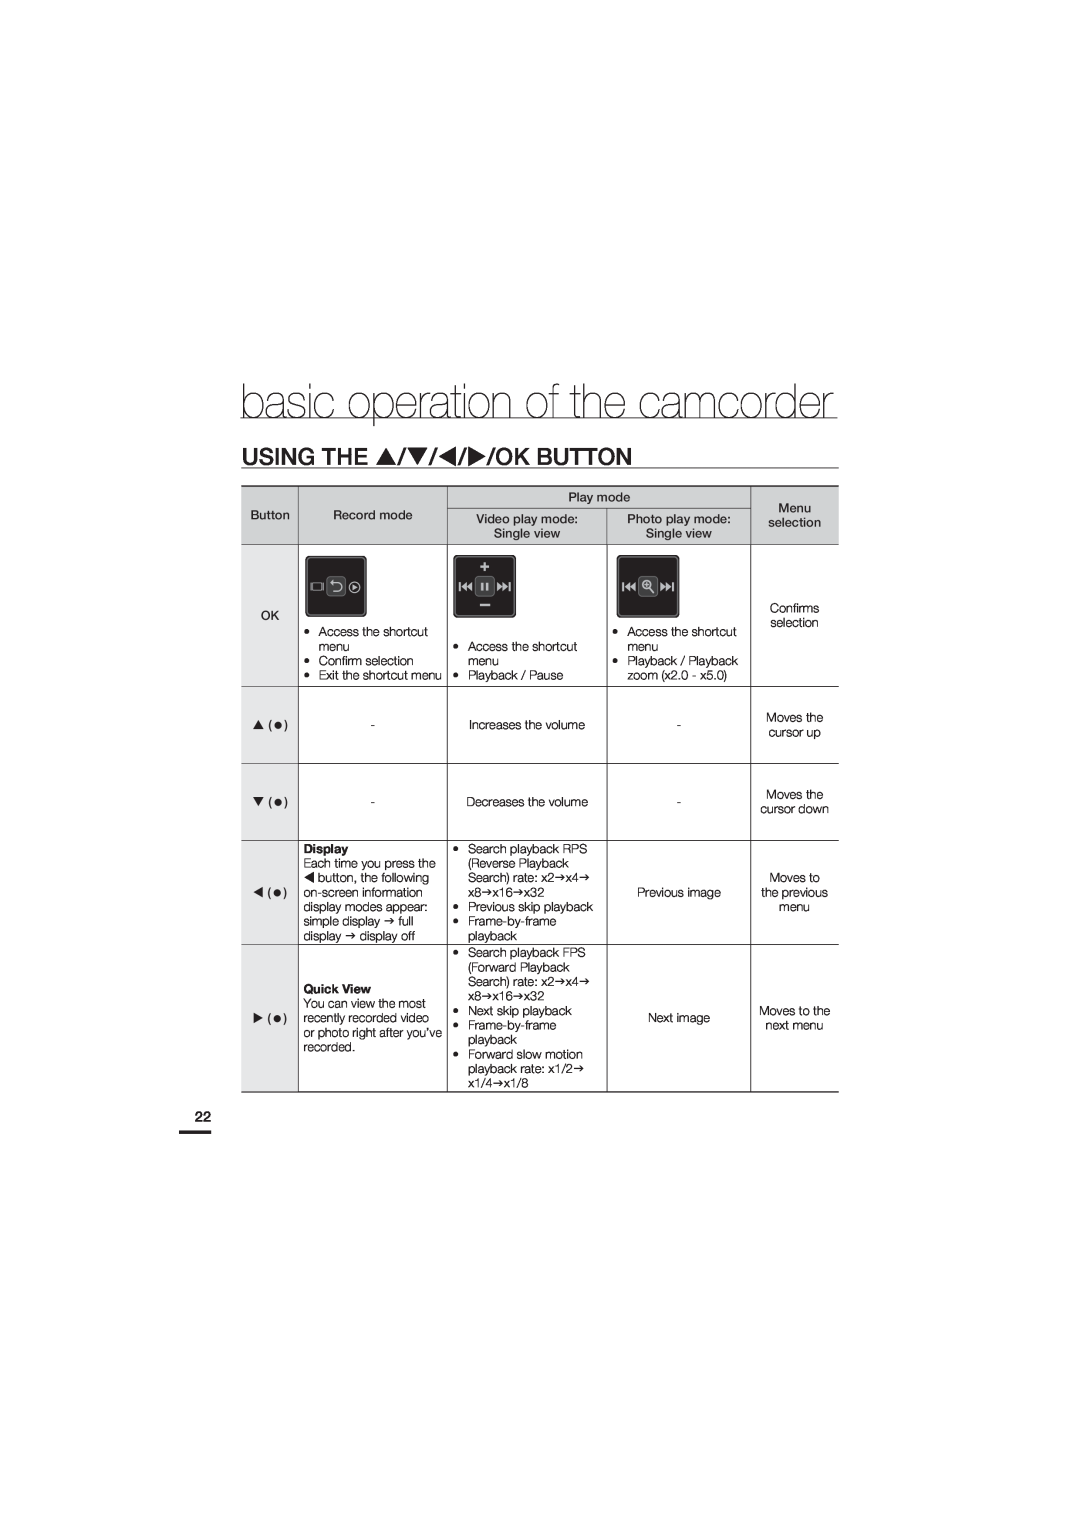 Samsung HMX-U20RP/XER, HMX-U20RP/EDC manual Using The, Ok Button, basic operation of the camcorder, Display, Quick View 